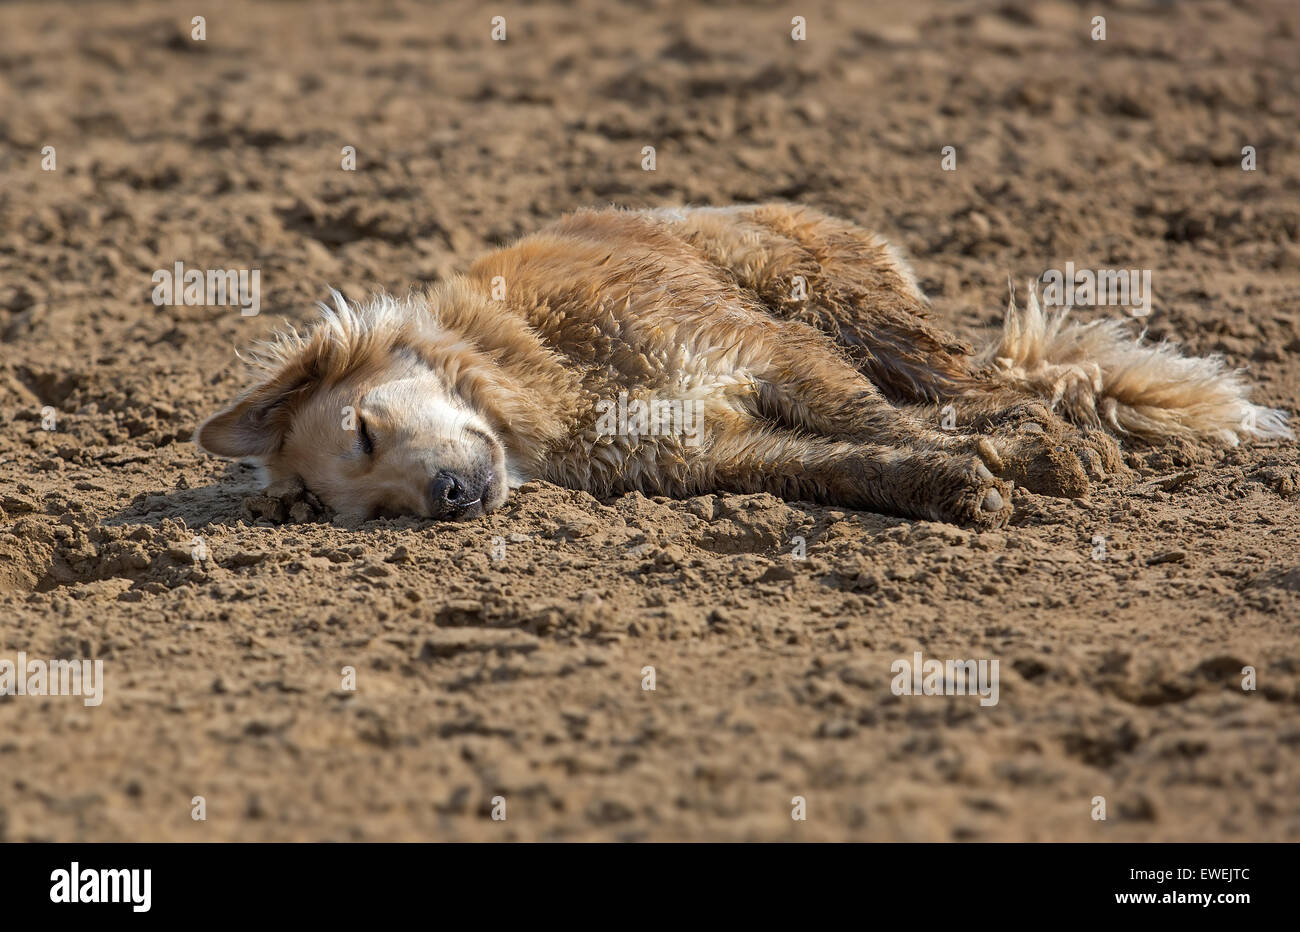 Mongrel dog lying on sand at hot summer day Stock Photo